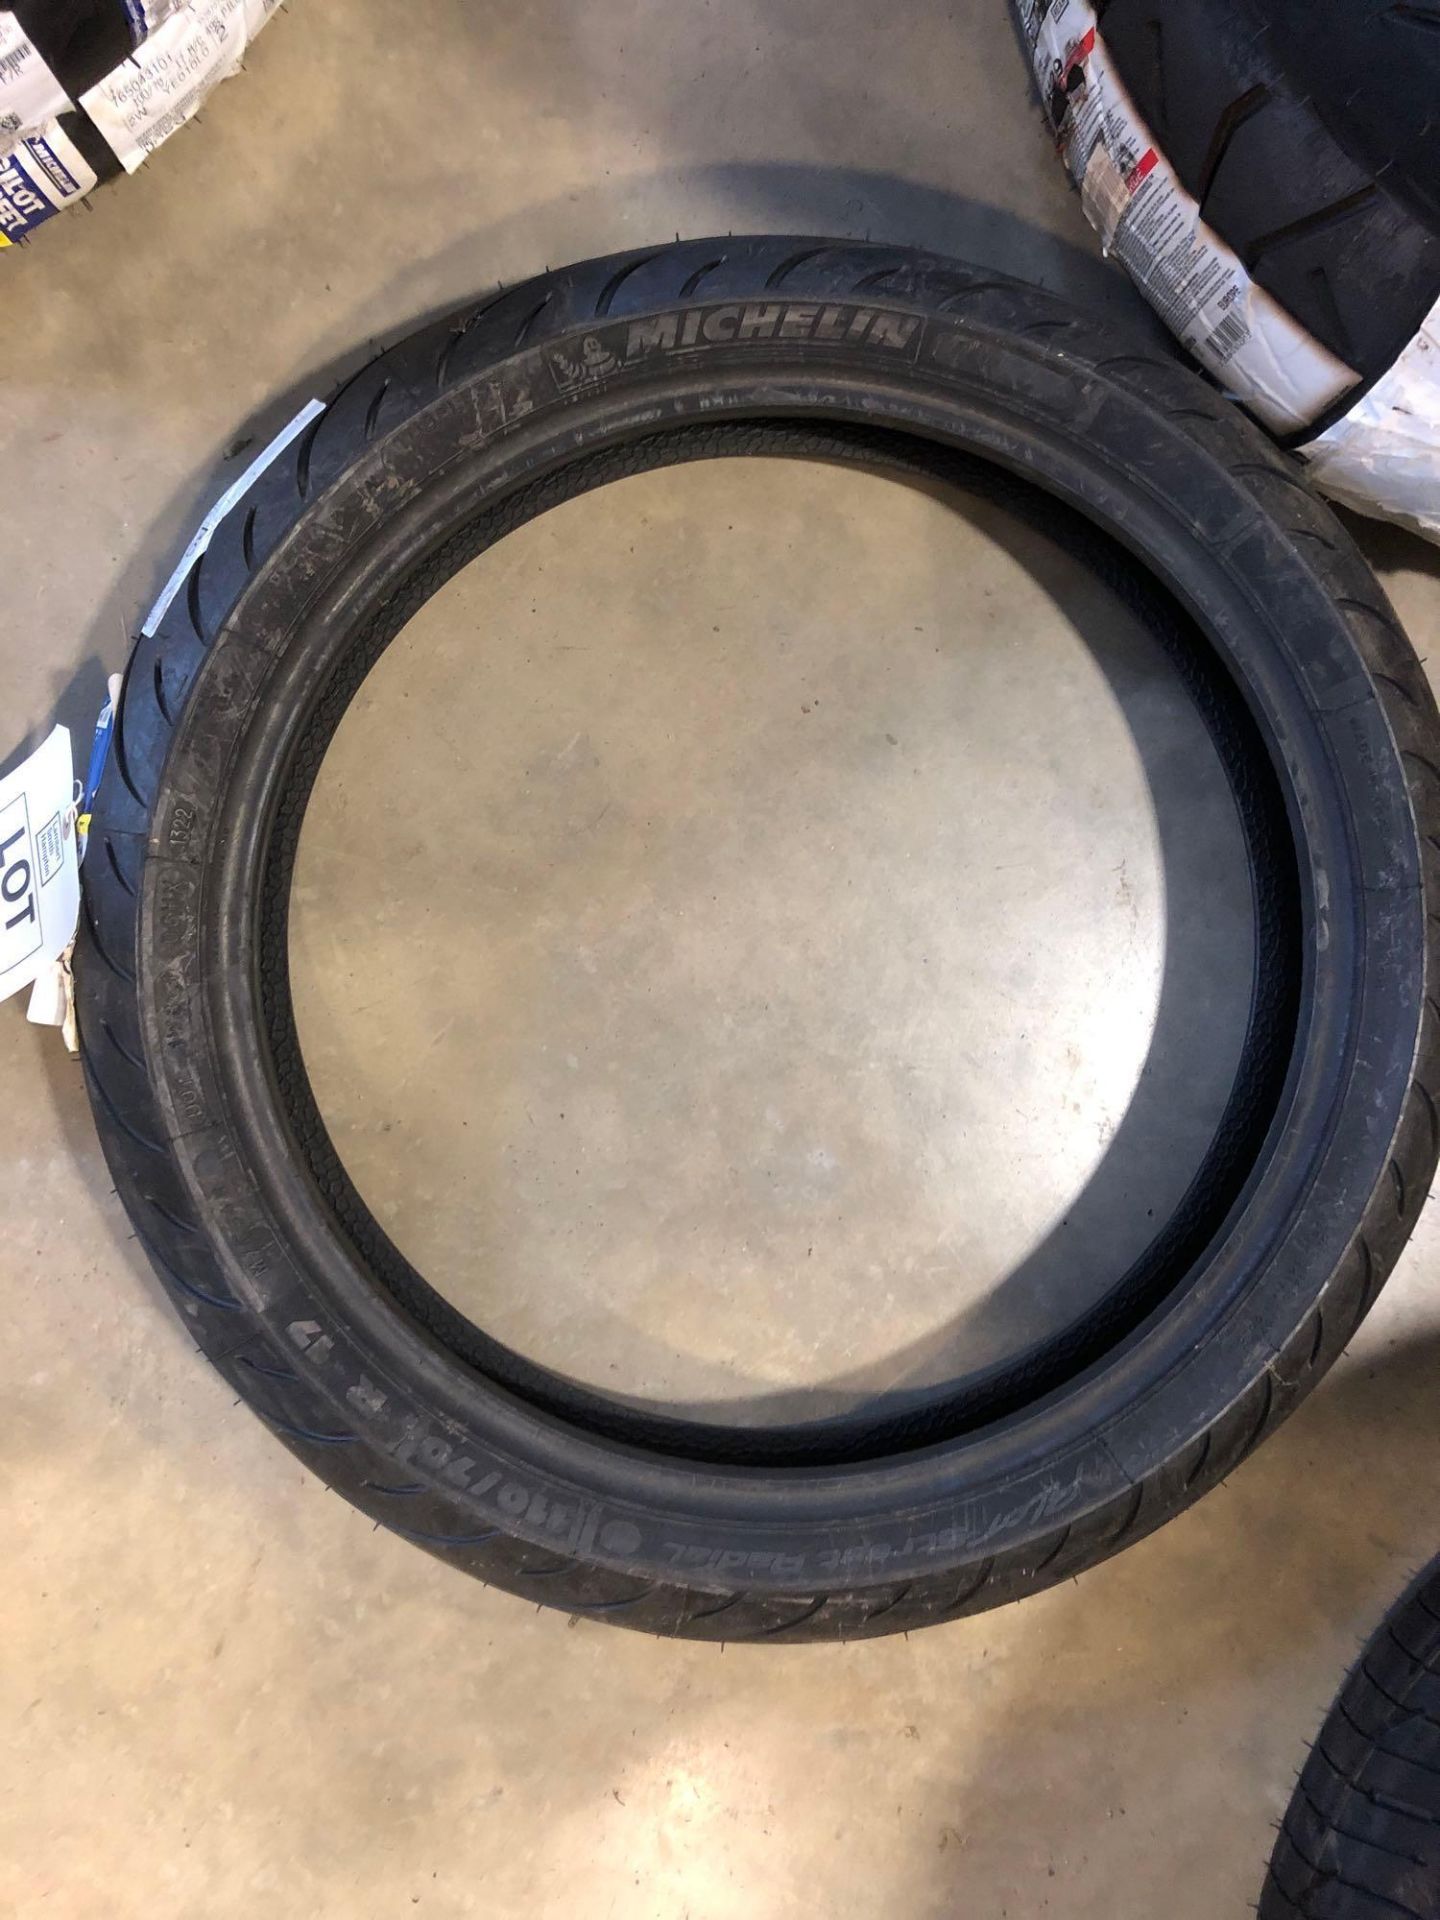 1 x Michelin Pilot 110-70-17 motorcycle tyre - Image 2 of 4